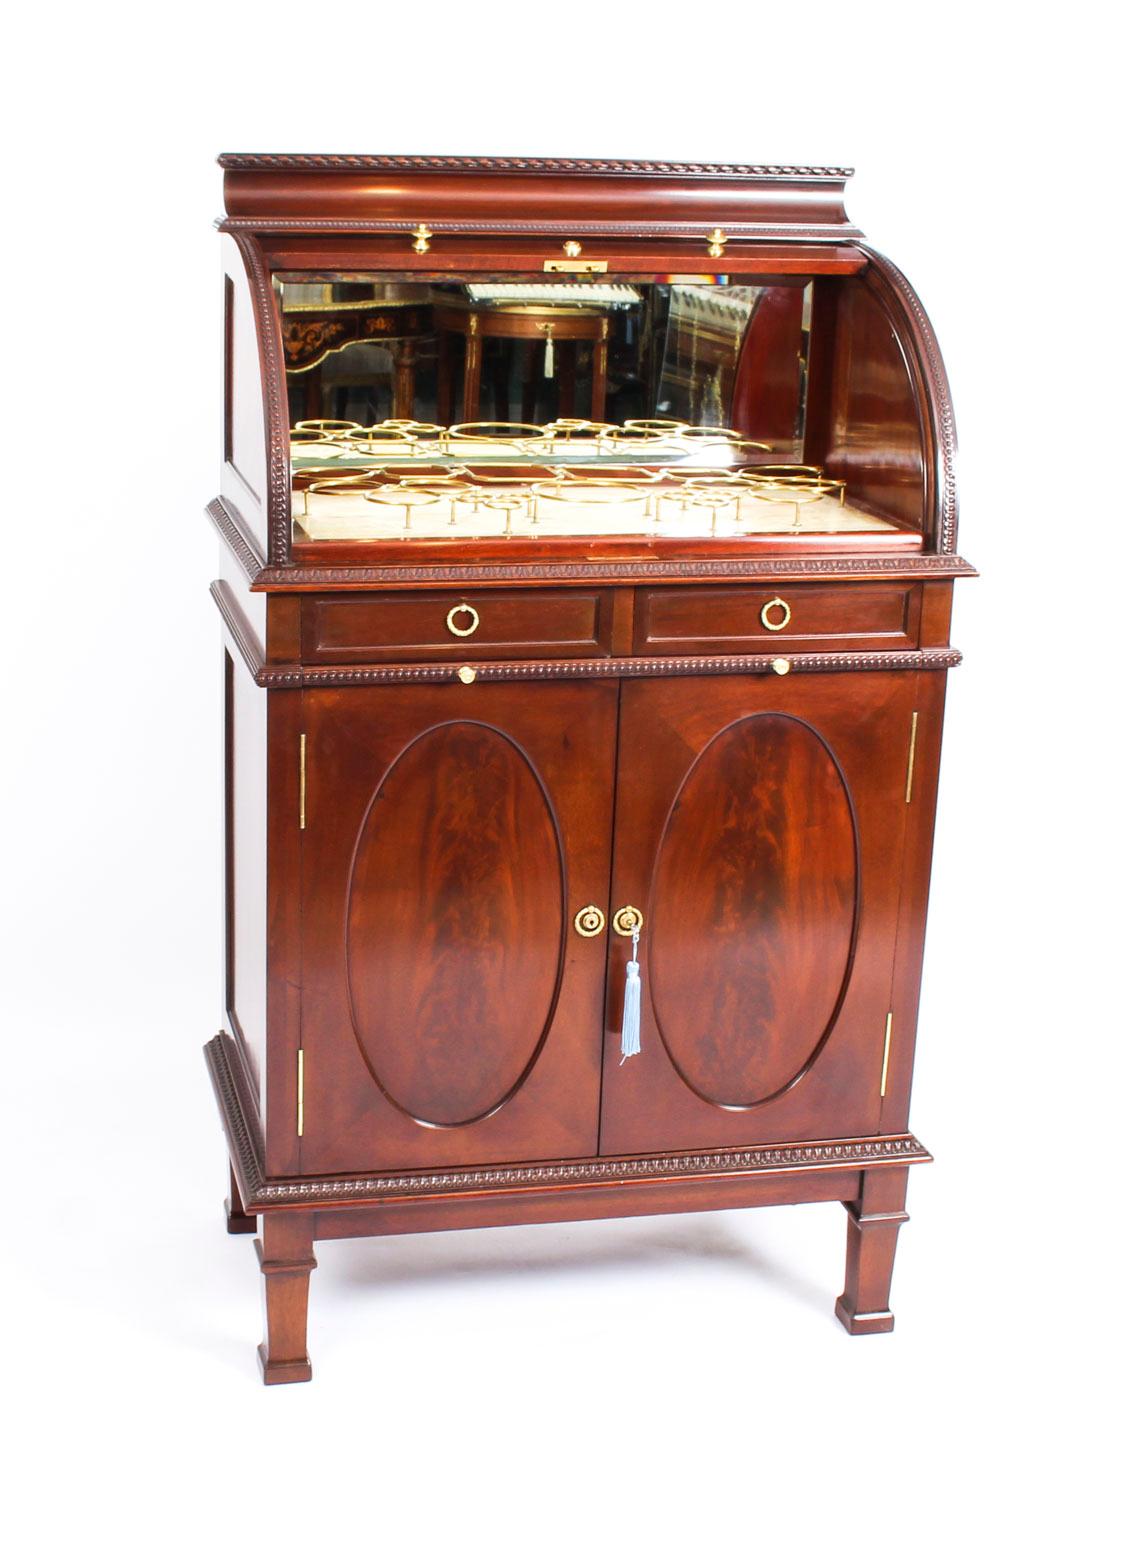 English Antique Mahogany Drinks Cocktail Cabinet Dry Bar, 19th Century